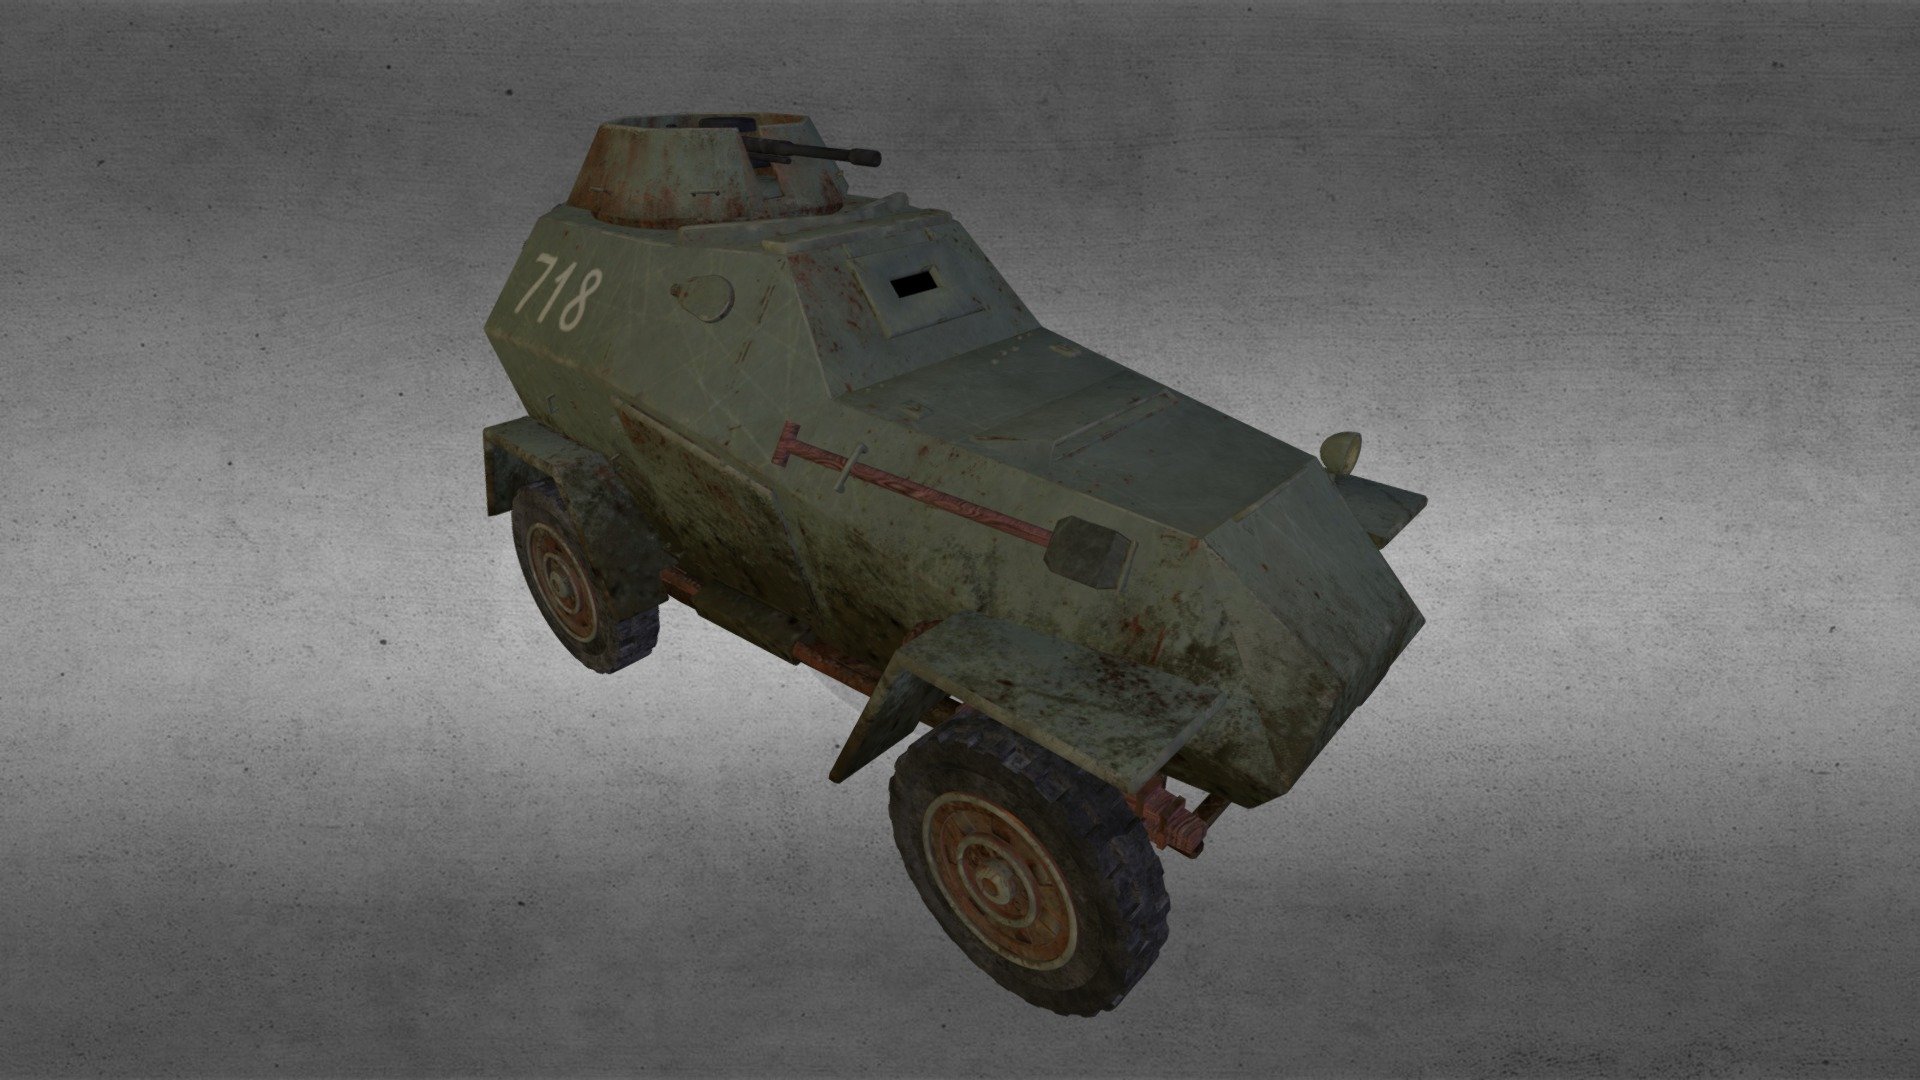 The BA-64 was a light armored and command car created by the Russian army during WW II. I modeled the car in Lightwave, and textured it with Substance Designer 3d model